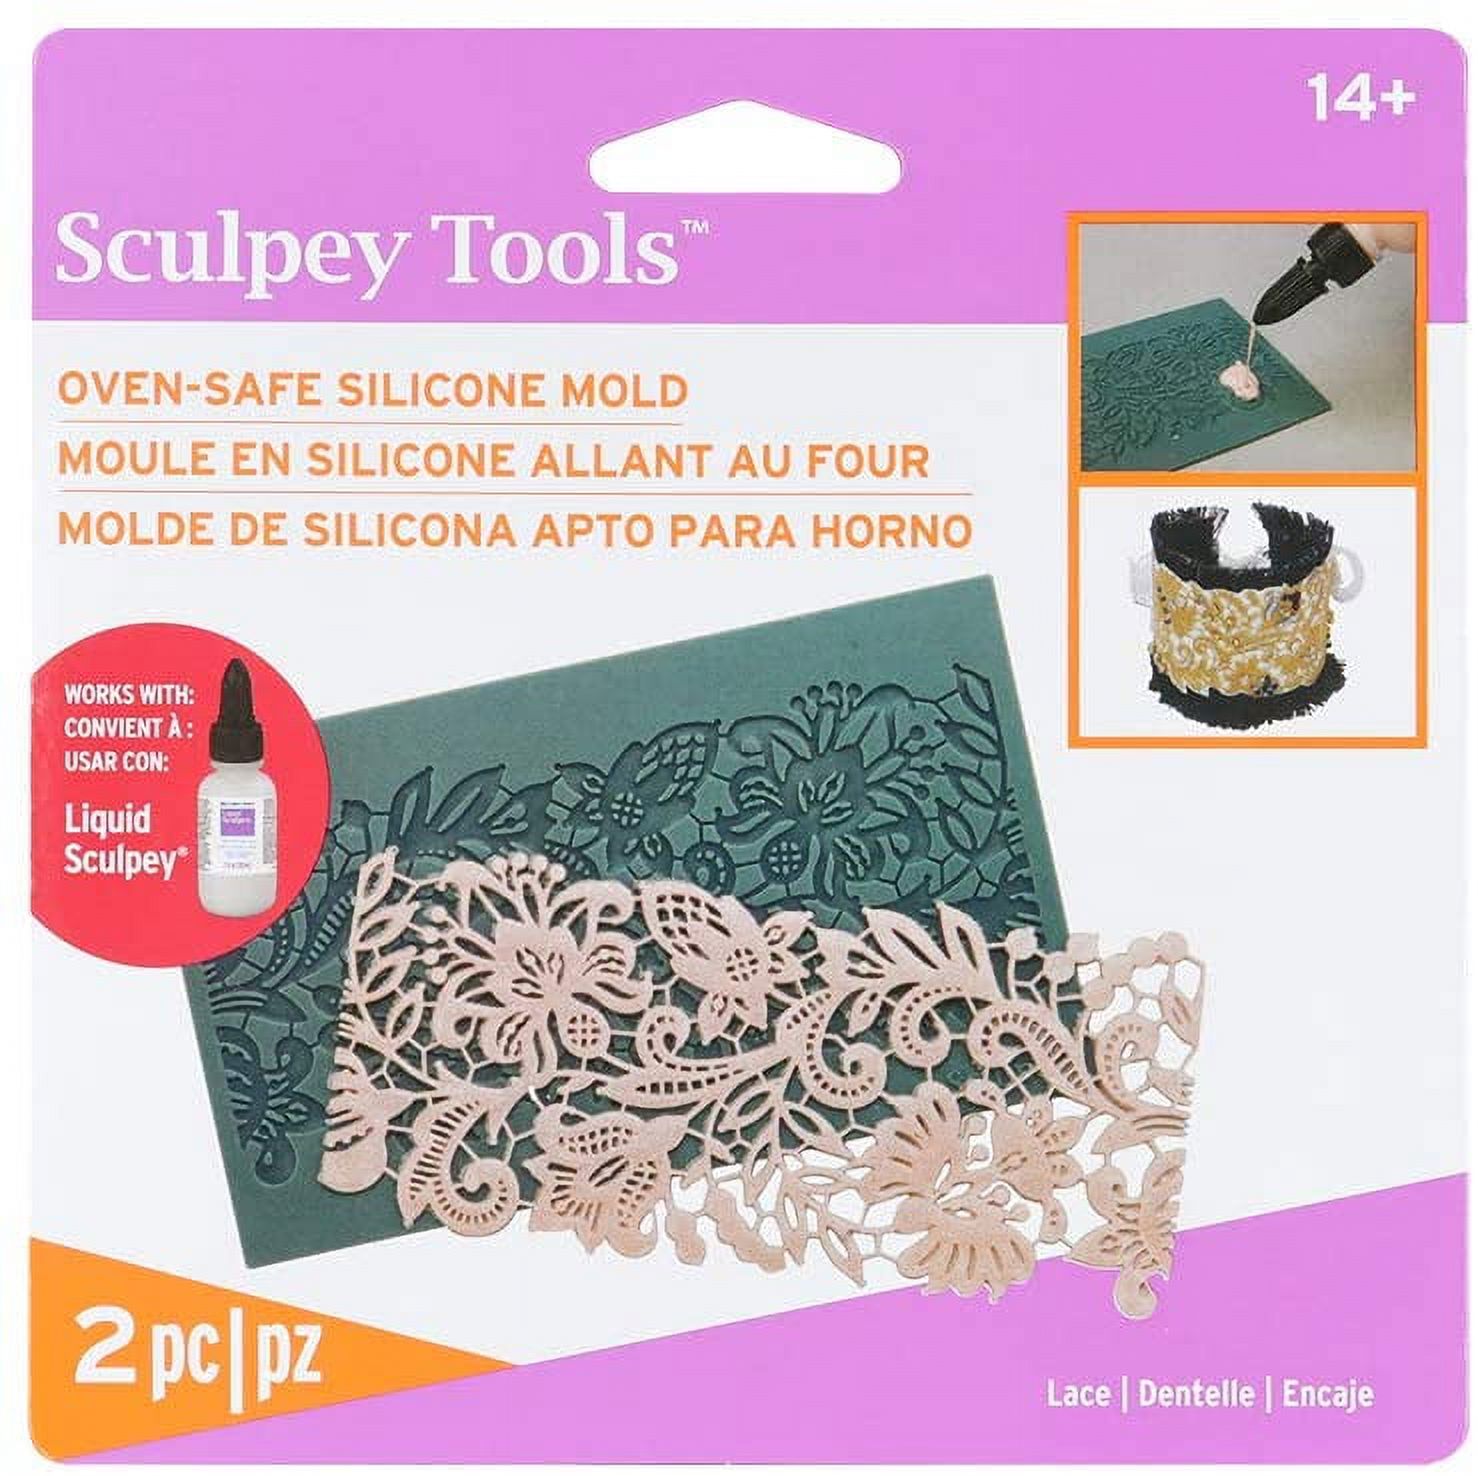 Polyform Sculpey Bakeable Silicone Mold Lace - image 1 of 3